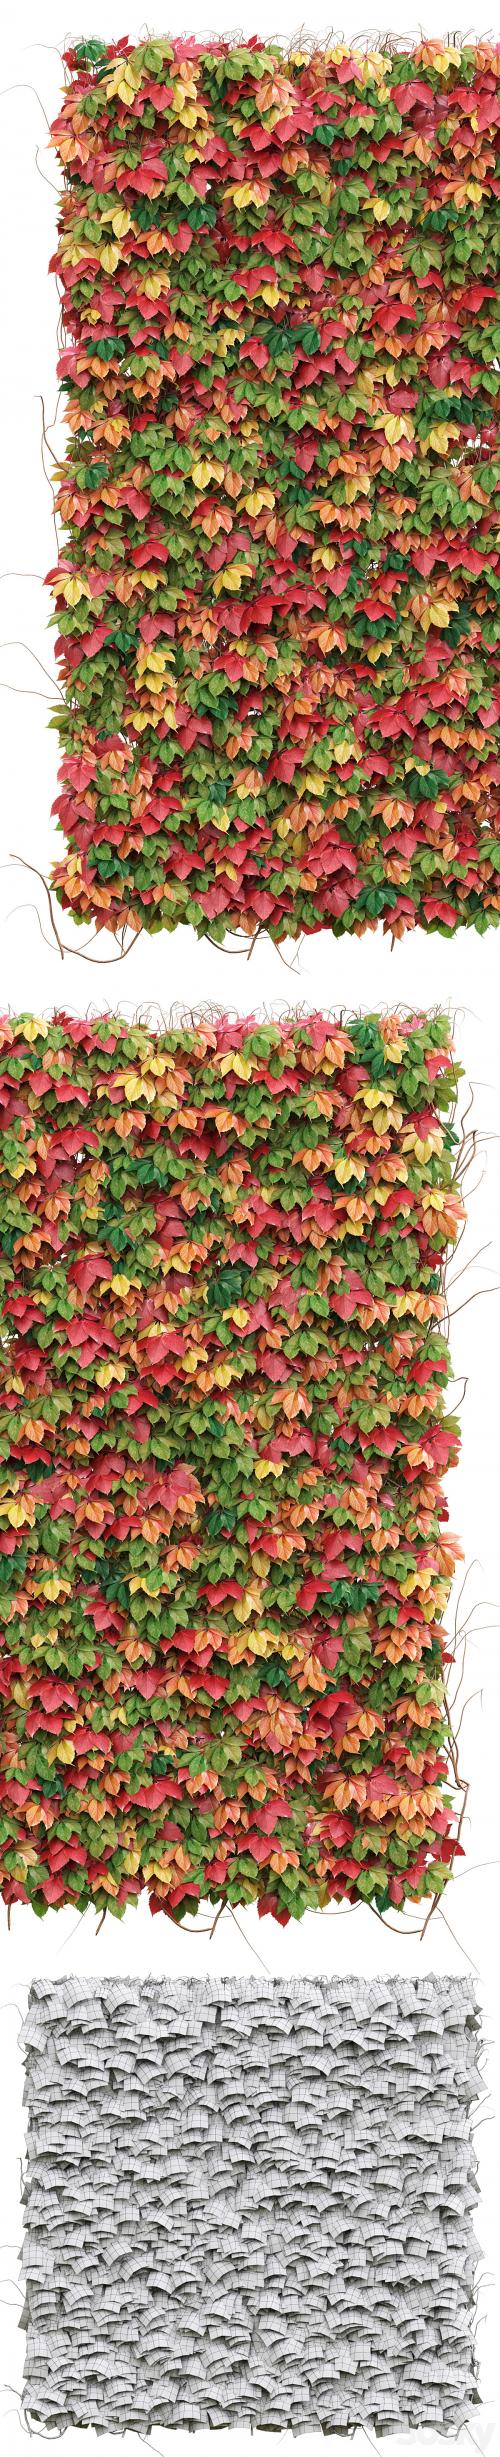 Decorative wall of autumn leaves of grapes